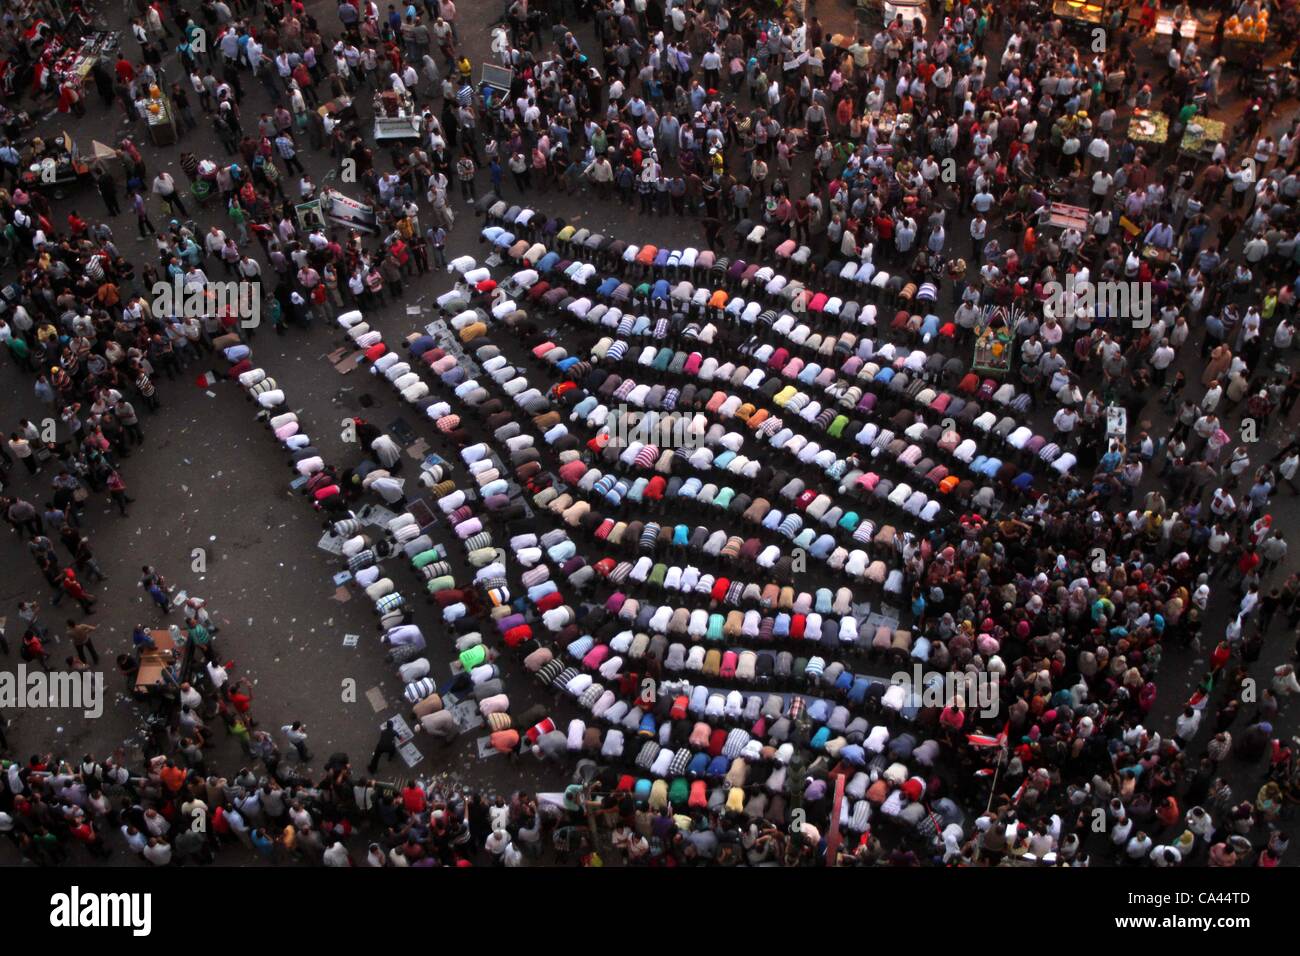 June 3, 2012 - Cairo, Cairo, Egypt - Protesters pray during a protest at Tahrir square in Cairo June 3, 2012. Egyptian pro-democracy campaigners called for a new uprising on Sunday, enraged that a court had spared former leader Hosni Mubarak his life over the killing of protesters during the street  Stock Photo